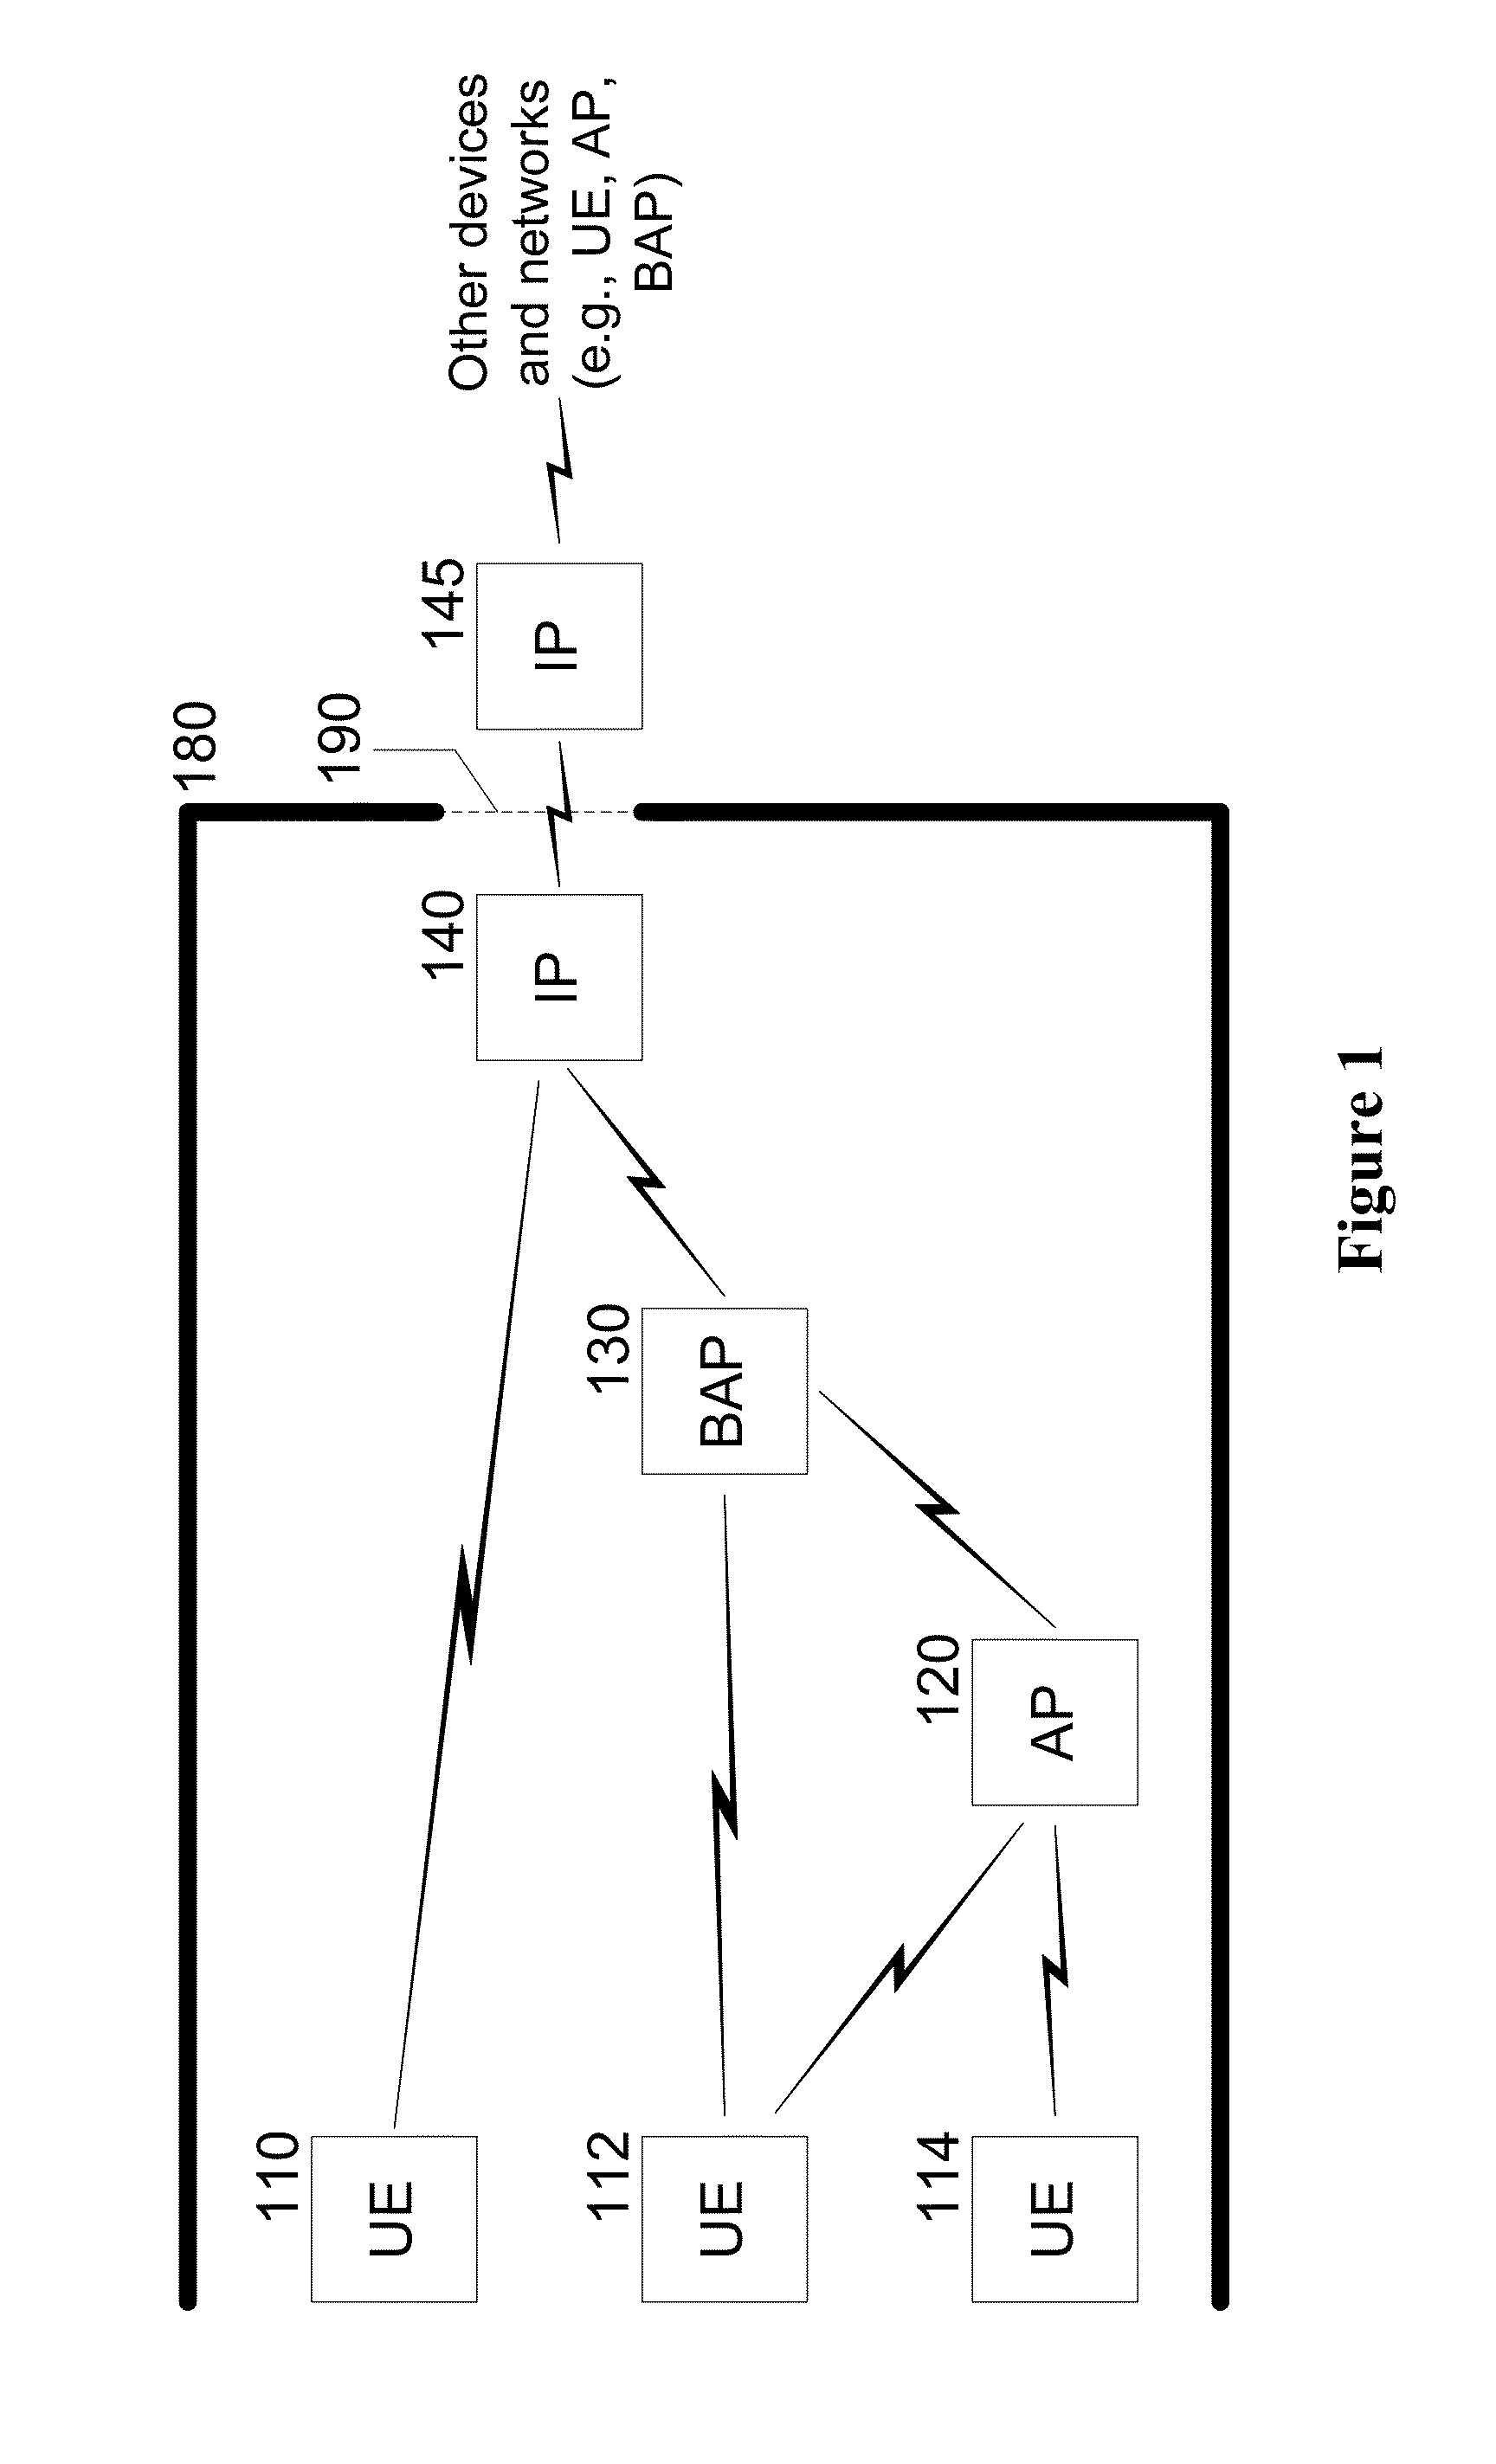 System, device, and method for high-frequency millimeter-wave wireless communication using interface points